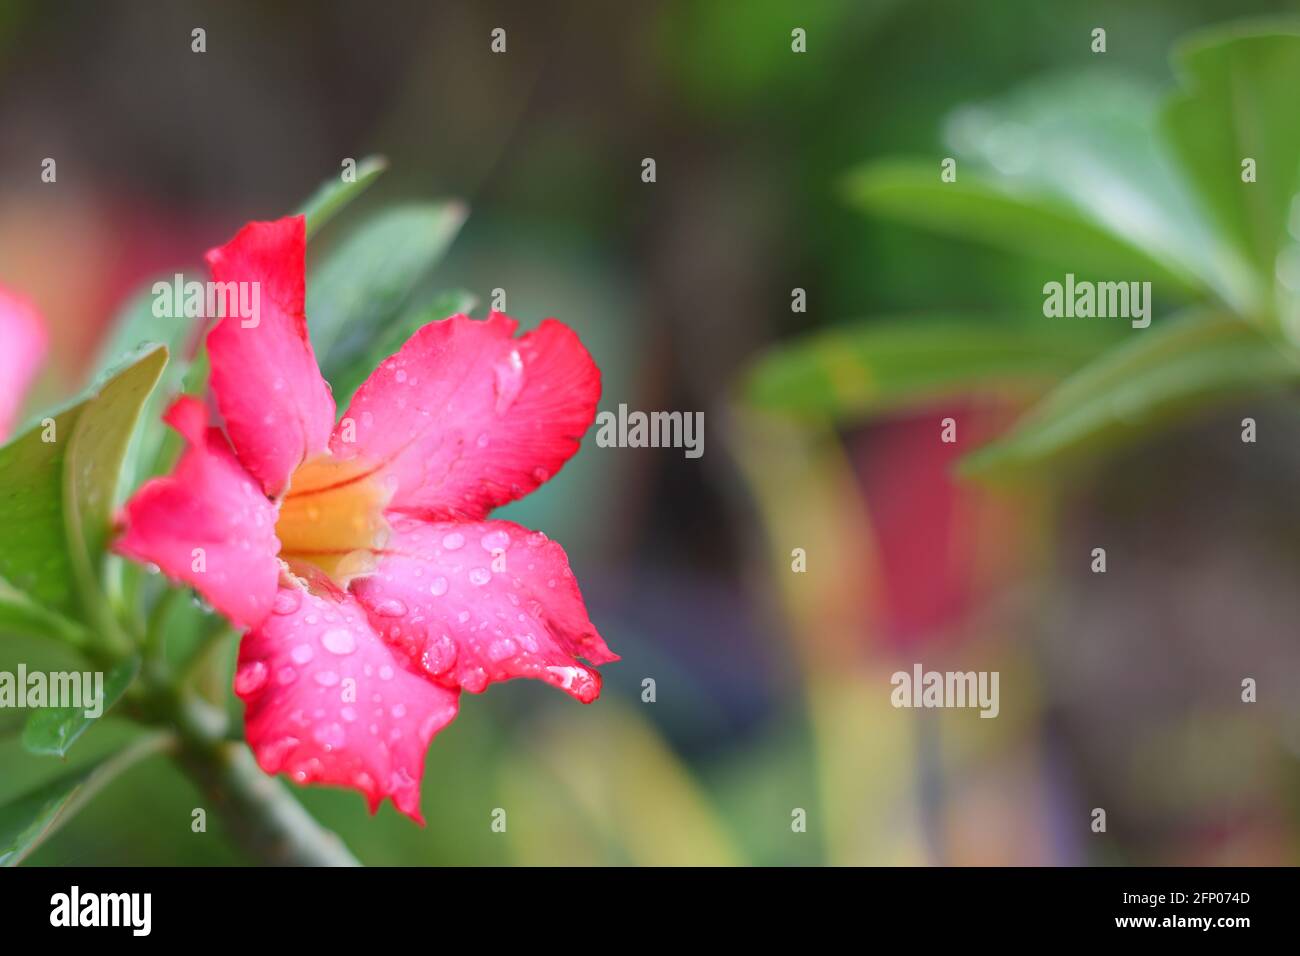 A close up photo of Desert rose (Adenium obesum) covered by raindrops Stock Photo